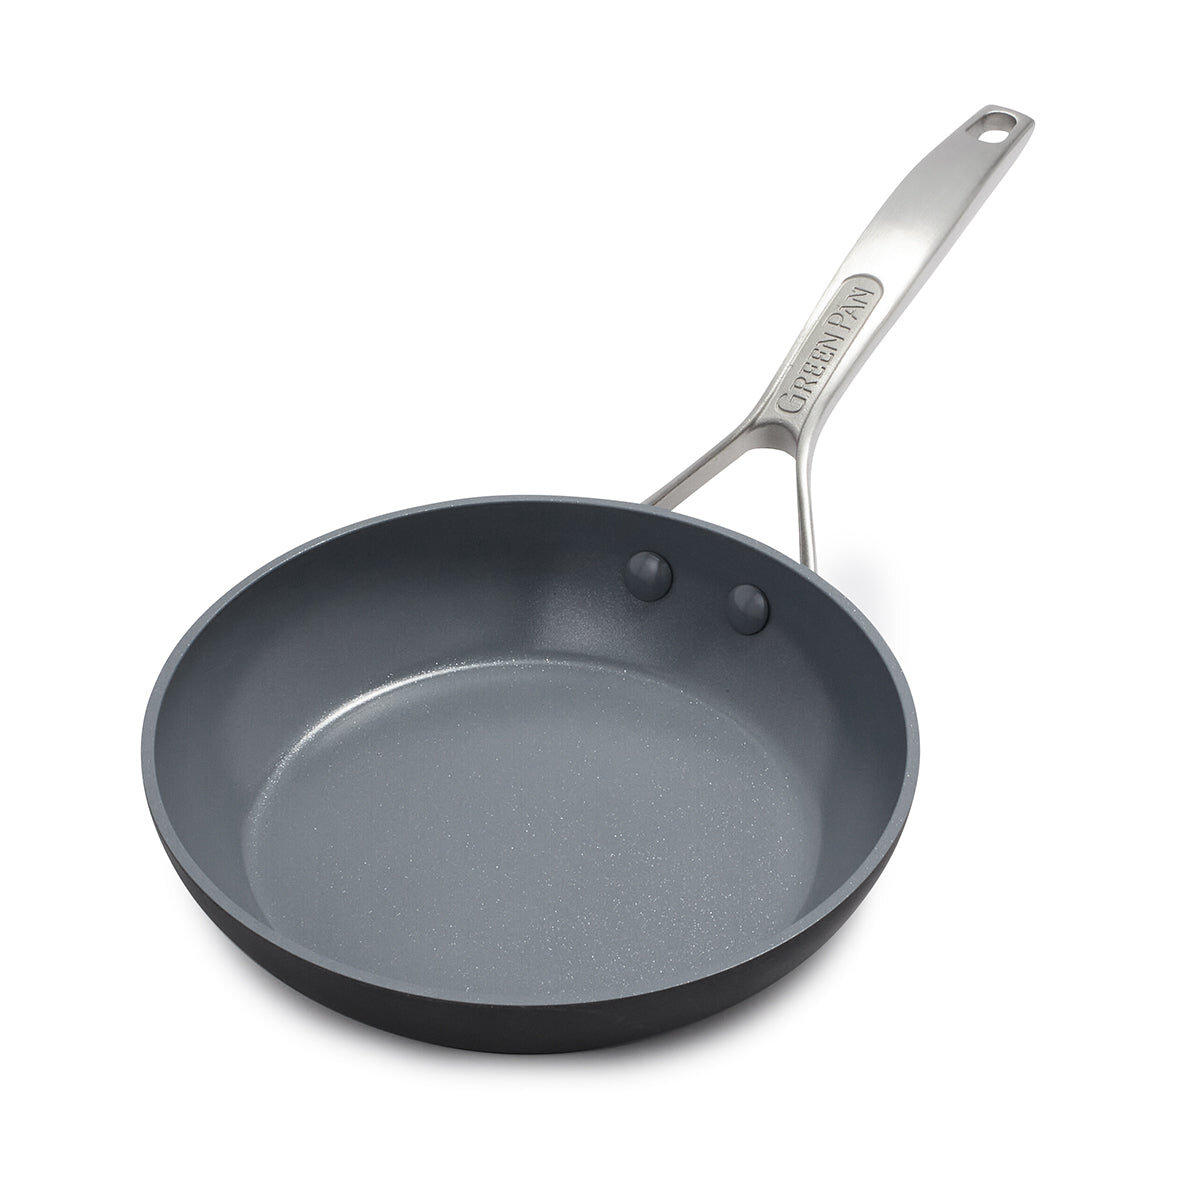 Zyliss Ultimate Pro Nonstick Saute Pan - 11 Inches